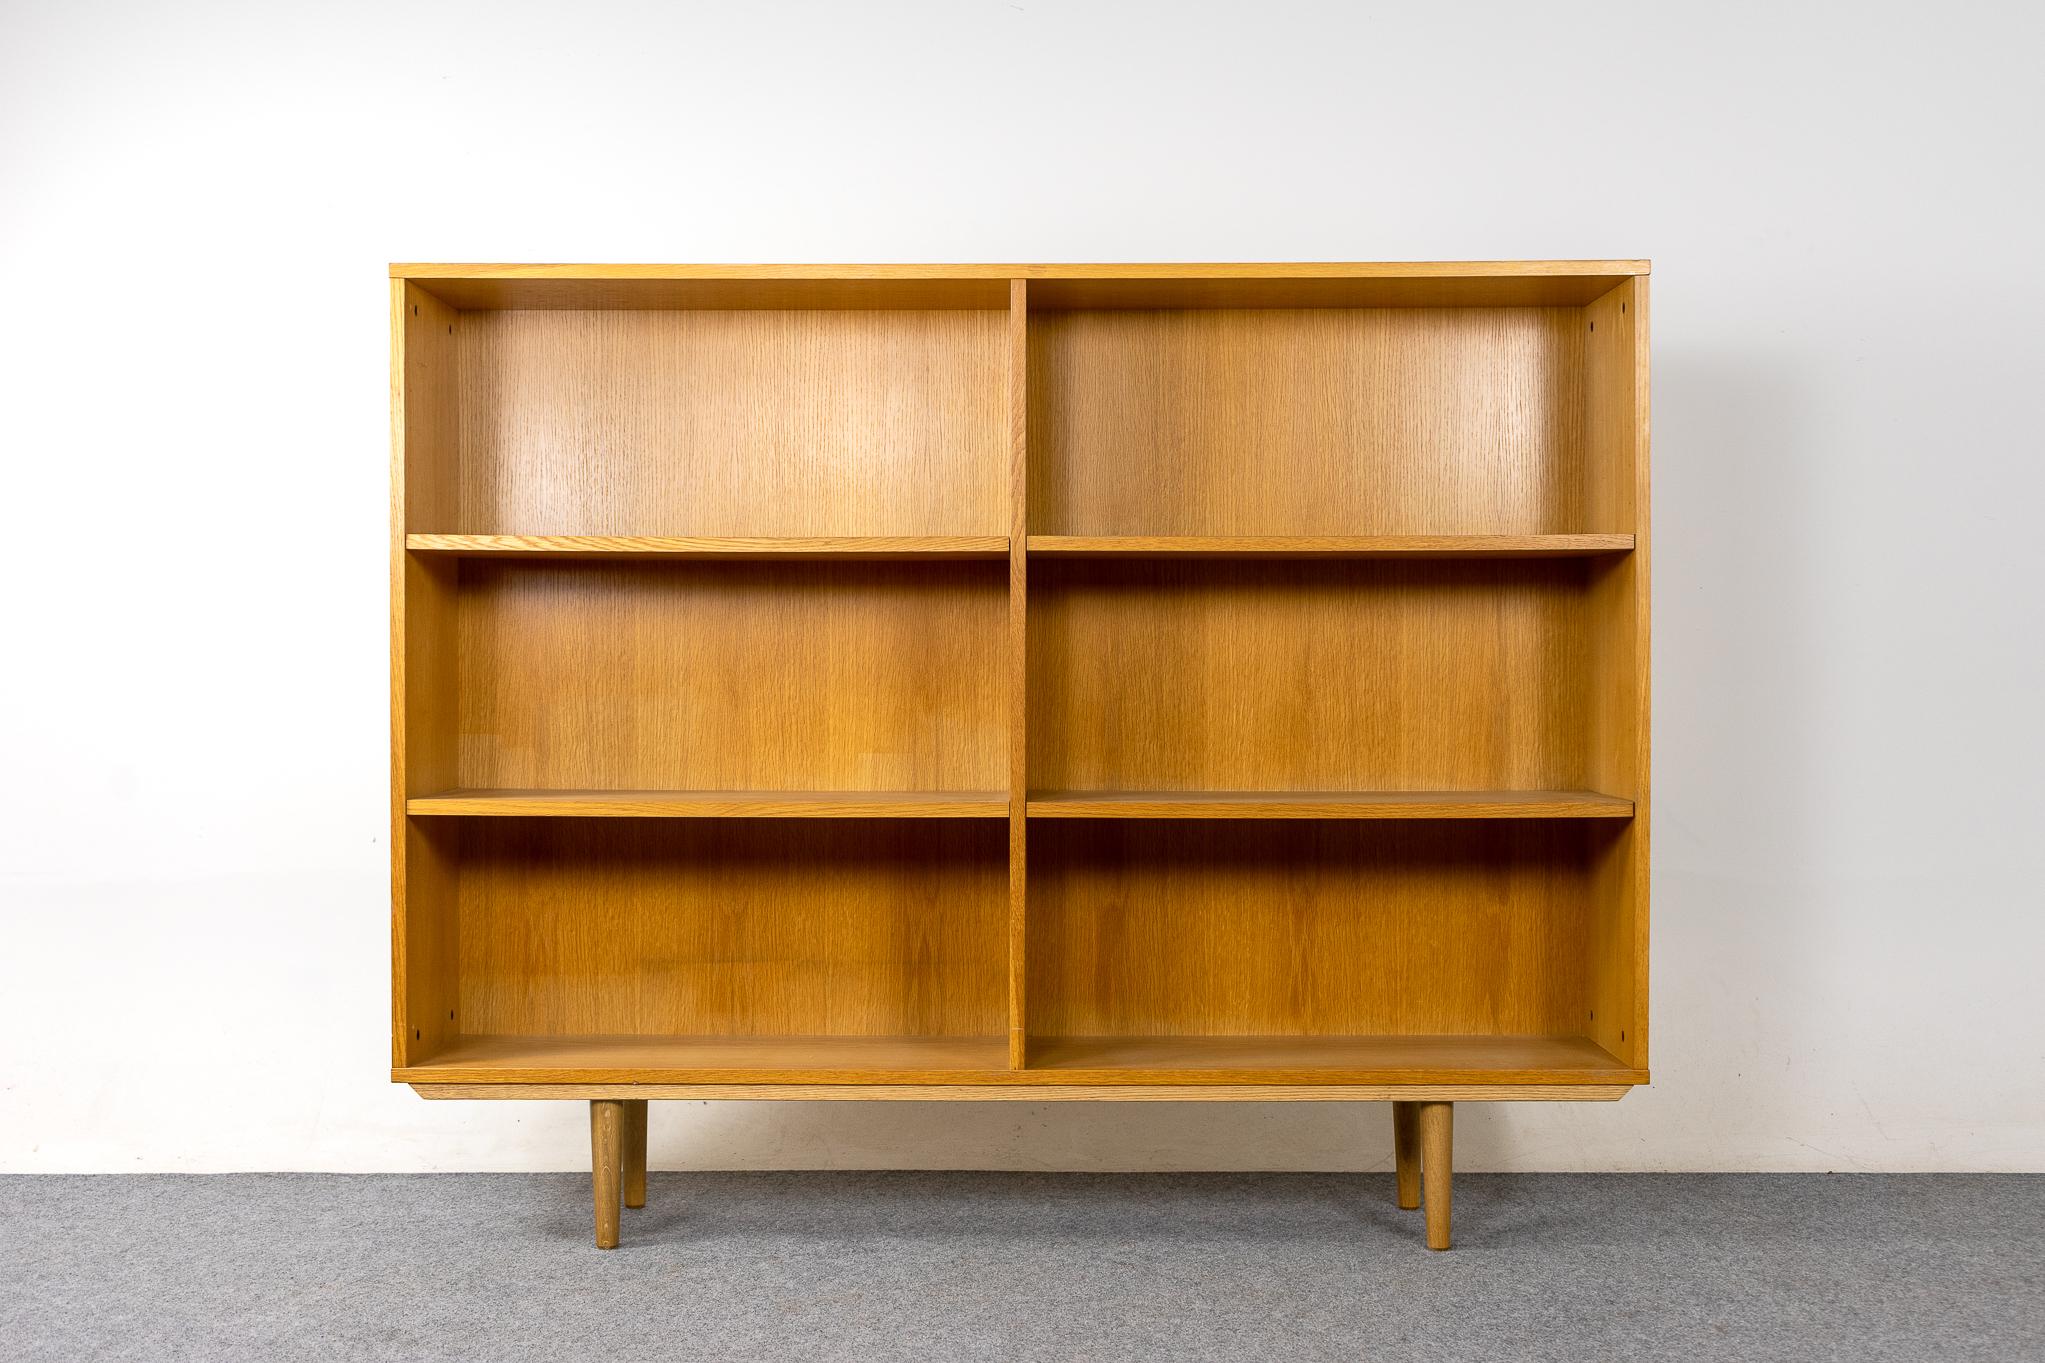 Oak Danish Modern bookcase, circa 1960's. Clean modern bookcase with adjustable shelving, 16 hanging options. Case sits upon removable, tapered solid wood legs. Finished back too! Very nice vintage condition.

Unrestored item, some minor marks